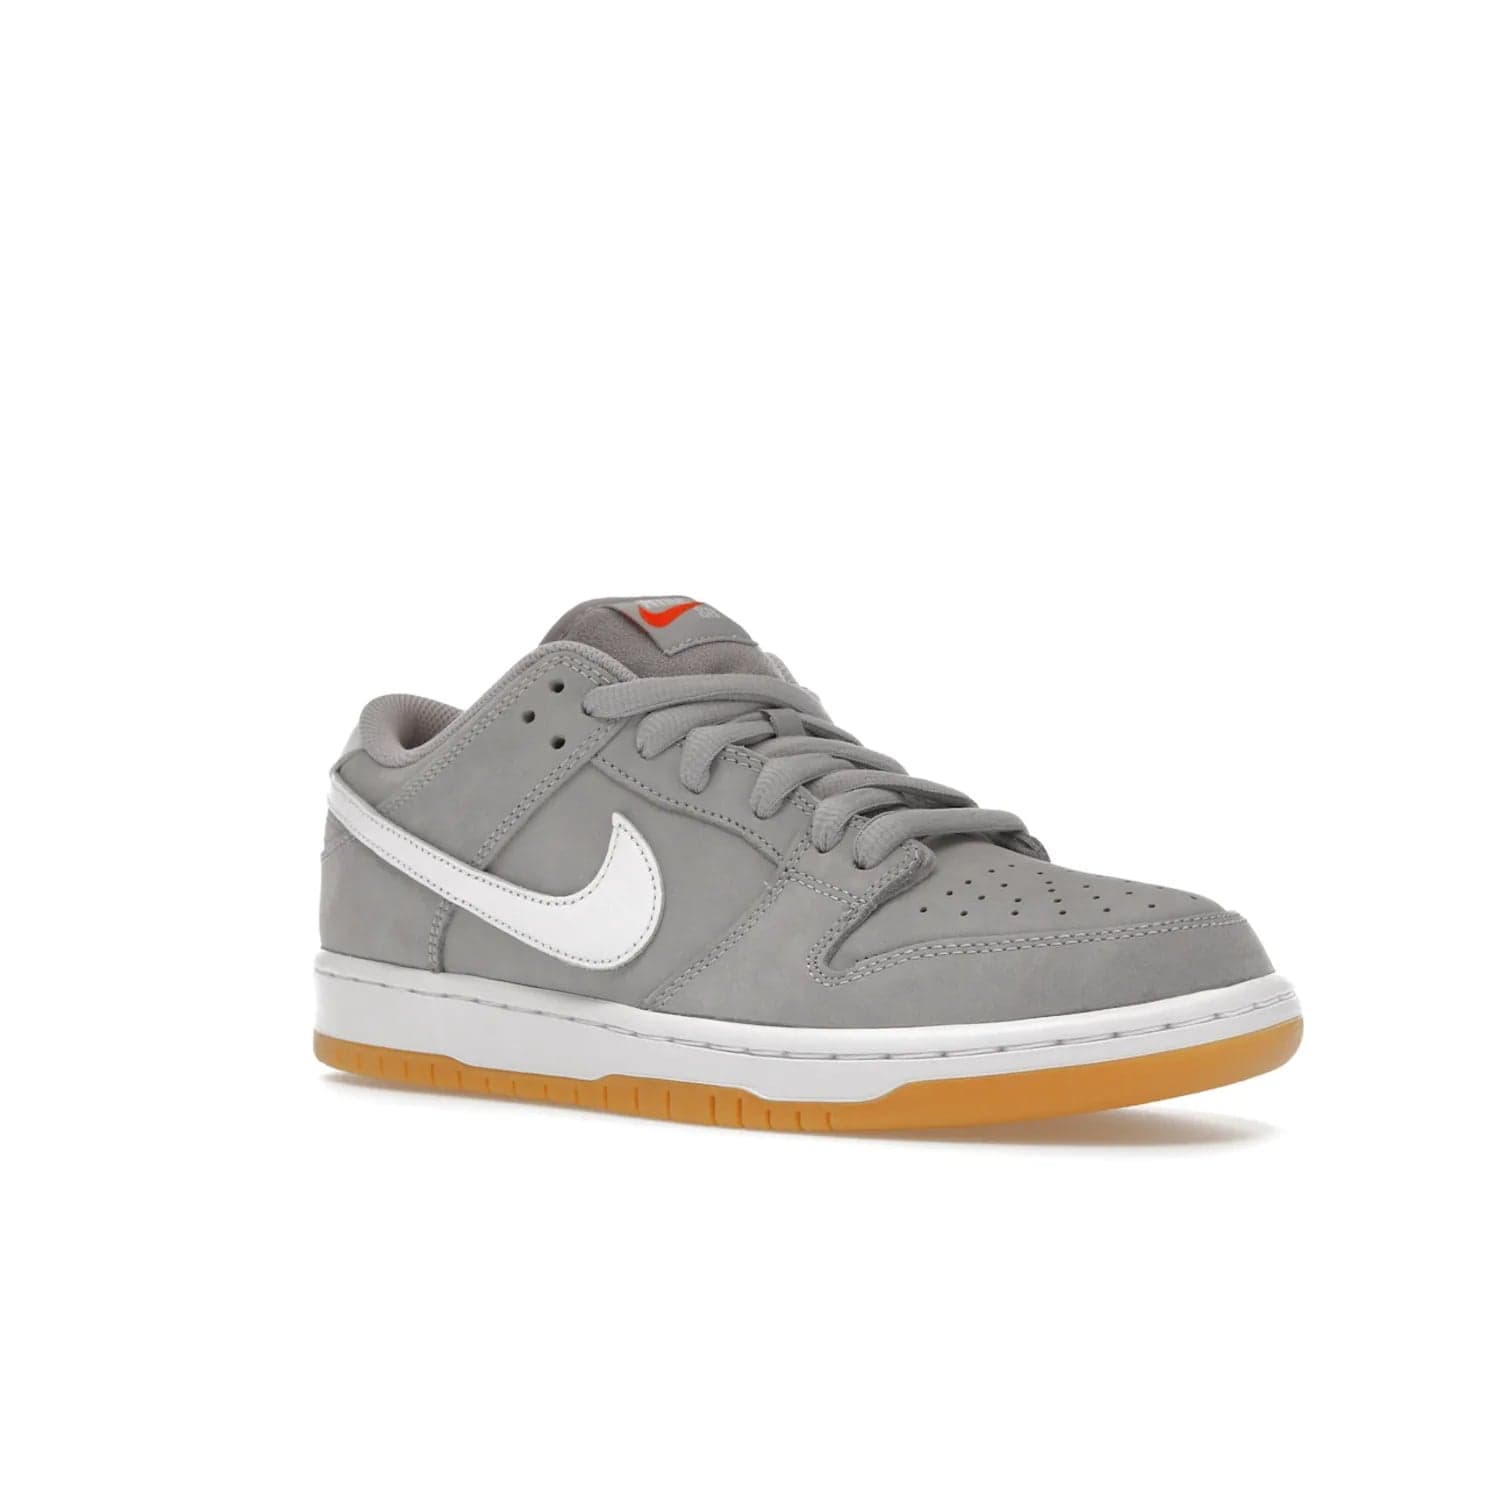 Nike SB Dunk Low Pro ISO Orange Label Wolf Grey Gum - Image 5 - Only at www.BallersClubKickz.com - Introducing Nike's SB Dunk Low Pro ISO Orange Label Wolf Grey Gum - a stylish shoe with a premium Wolf Grey upper, white leather Nike Swoosh, and an eye-catching gum outsole. With special Nike branding and packaging, this shoe adds a unique fashion statement. Out Feb. 24, 2023.